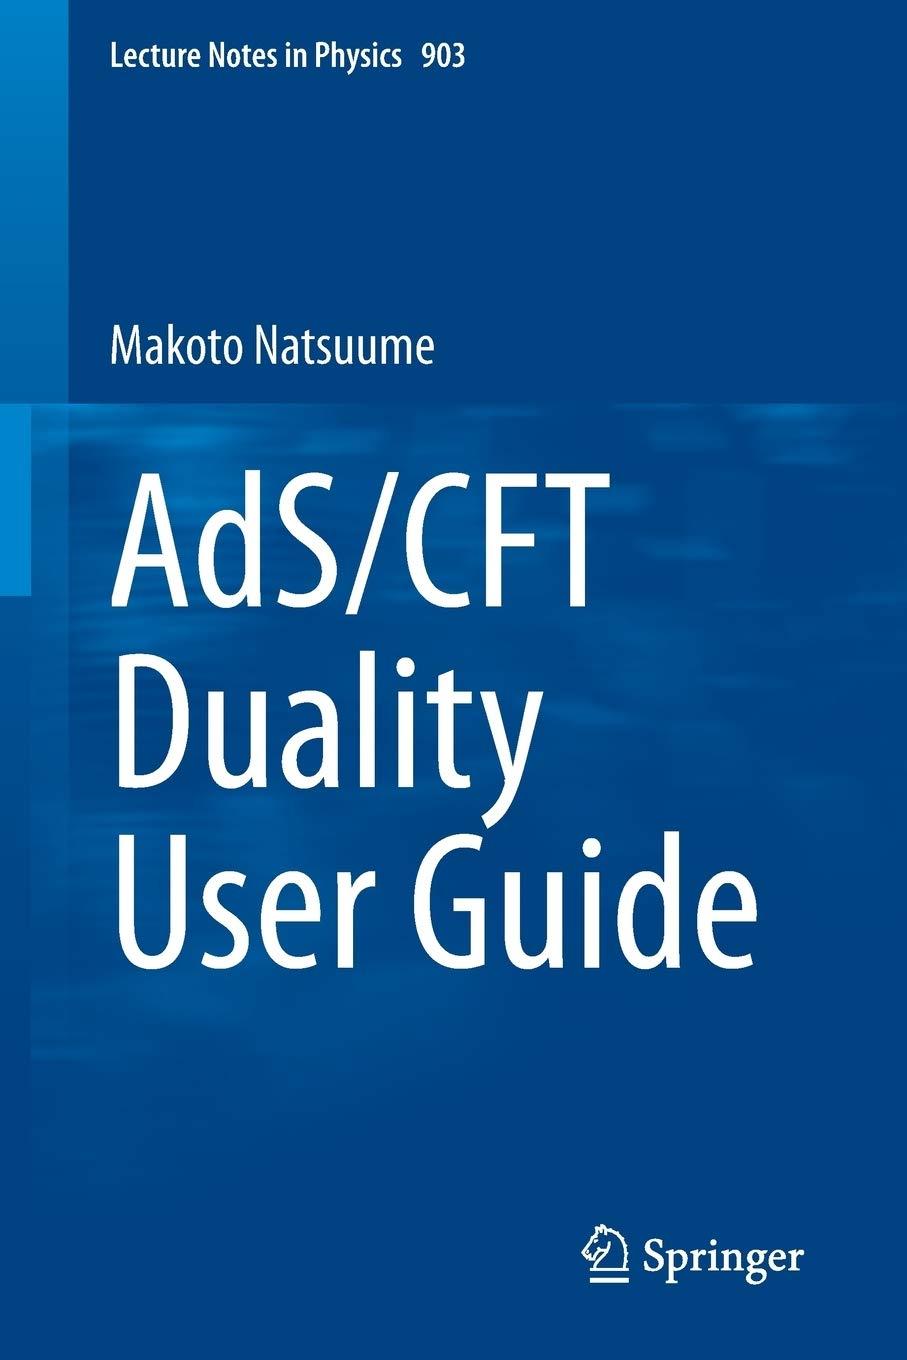 ads cft duality user guide 1st edition makoto natsuume 978-4431554400